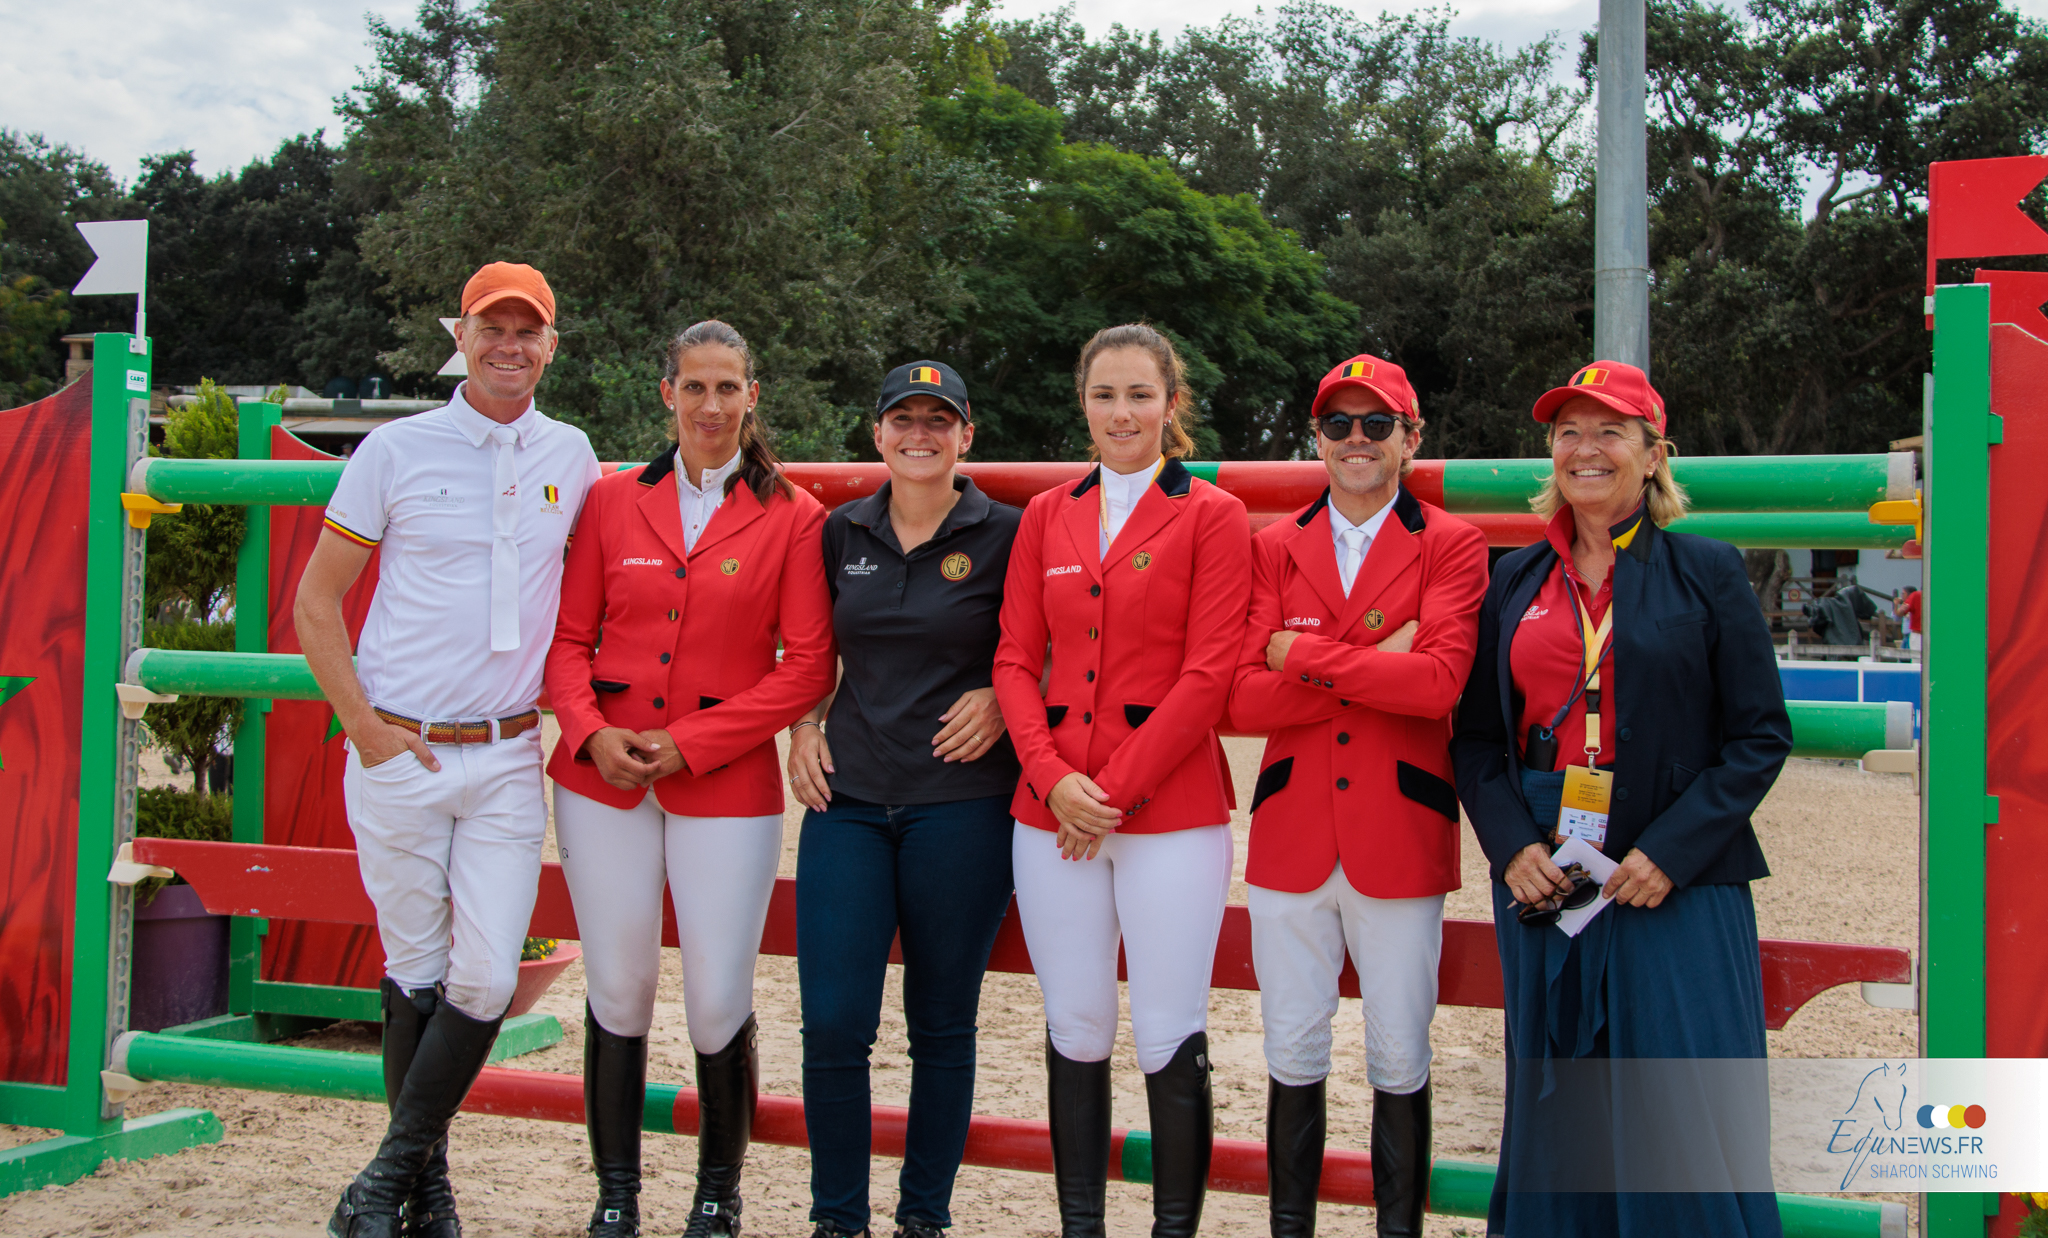 Team Belgium wins the Nations Cup of the Morocco Royal Tour in Rabat